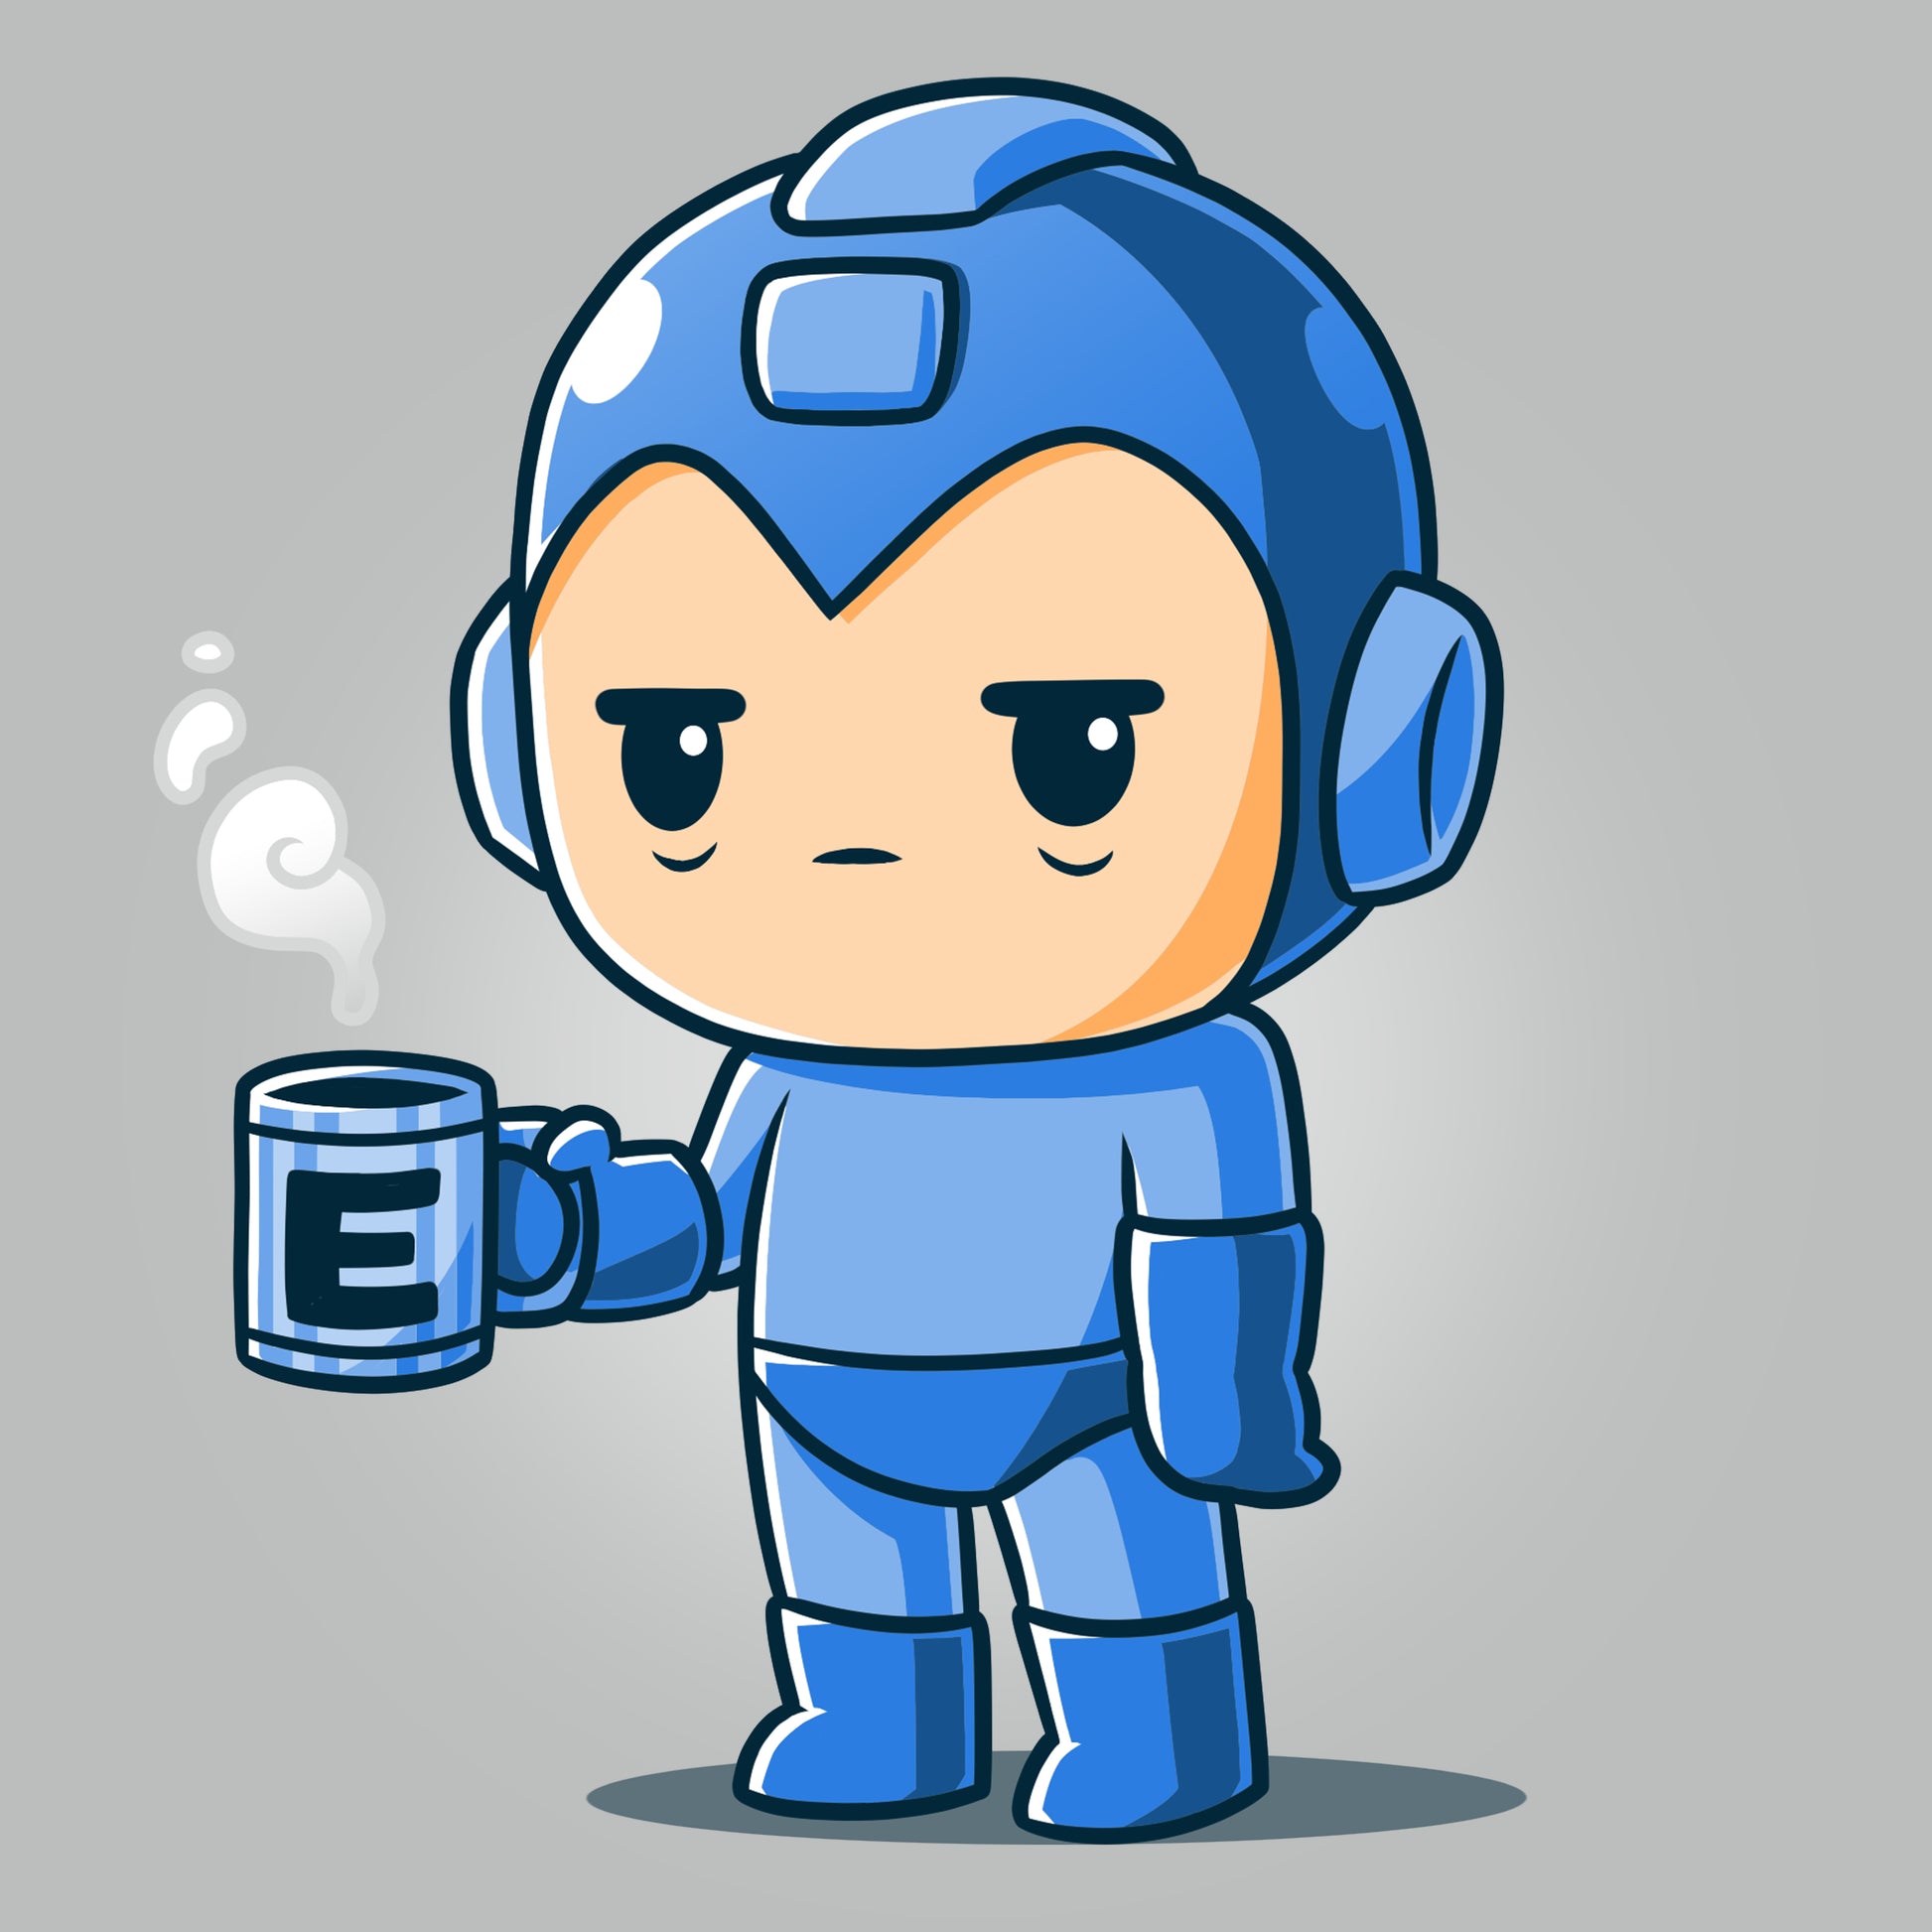 A blue Energy Capsule Needed Mega Man holding a cup of coffee. (Brand: Capcom)